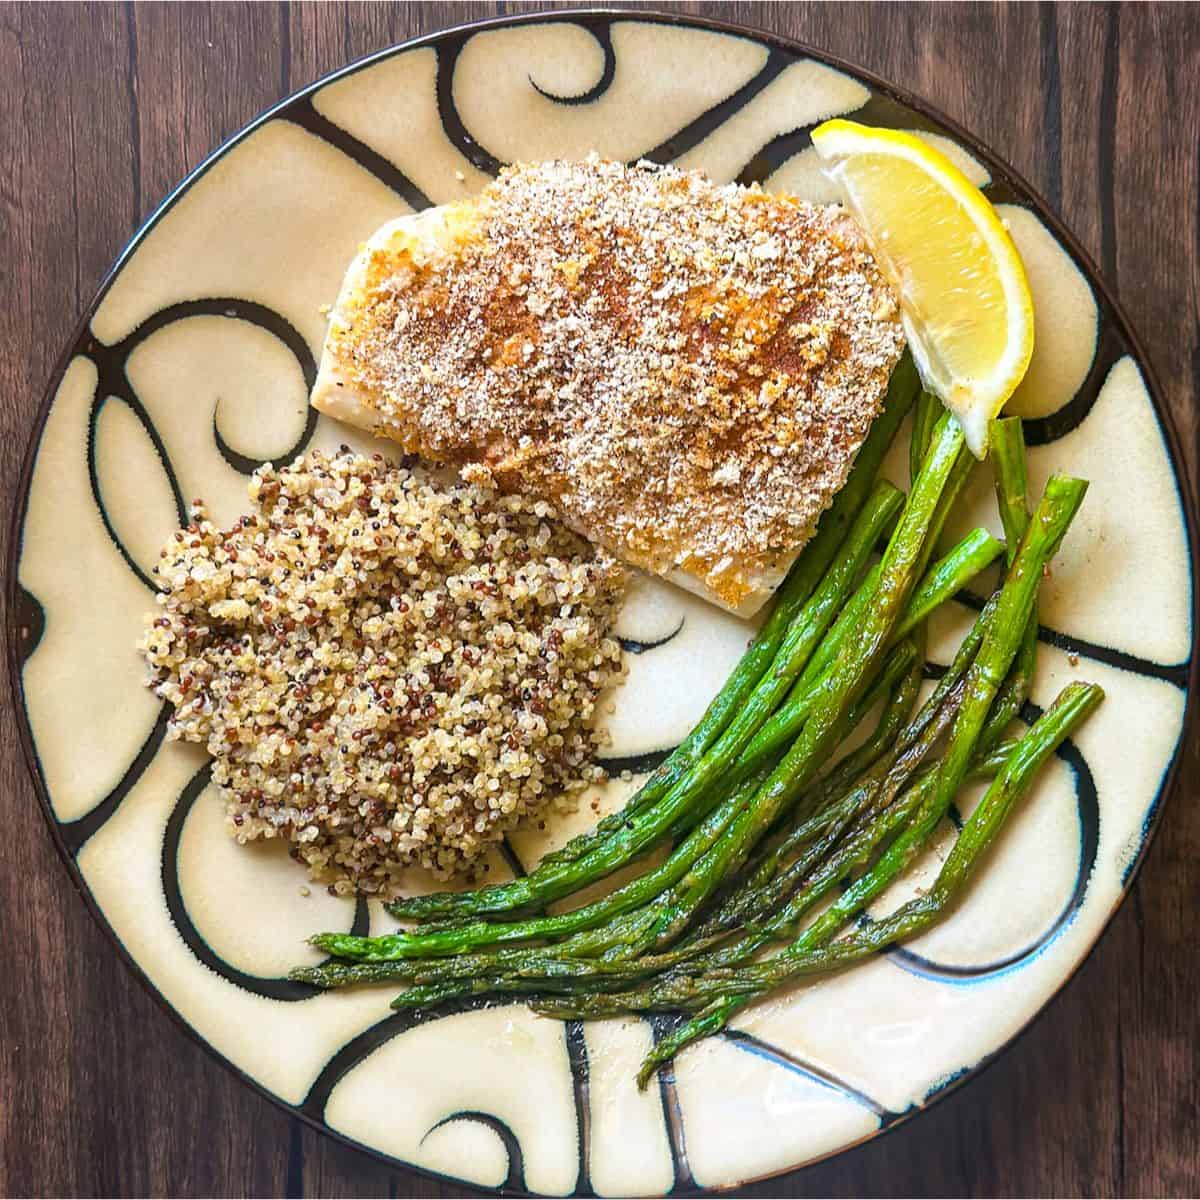 A tan and black swirled decorative round plate with a Mahi Mahi fillet covered in lightly browned bread crumb and spice mixture. Next to the fish is a lemon wedge, a pile of multi-colored quinoa, and a side of sautéed asparagus.